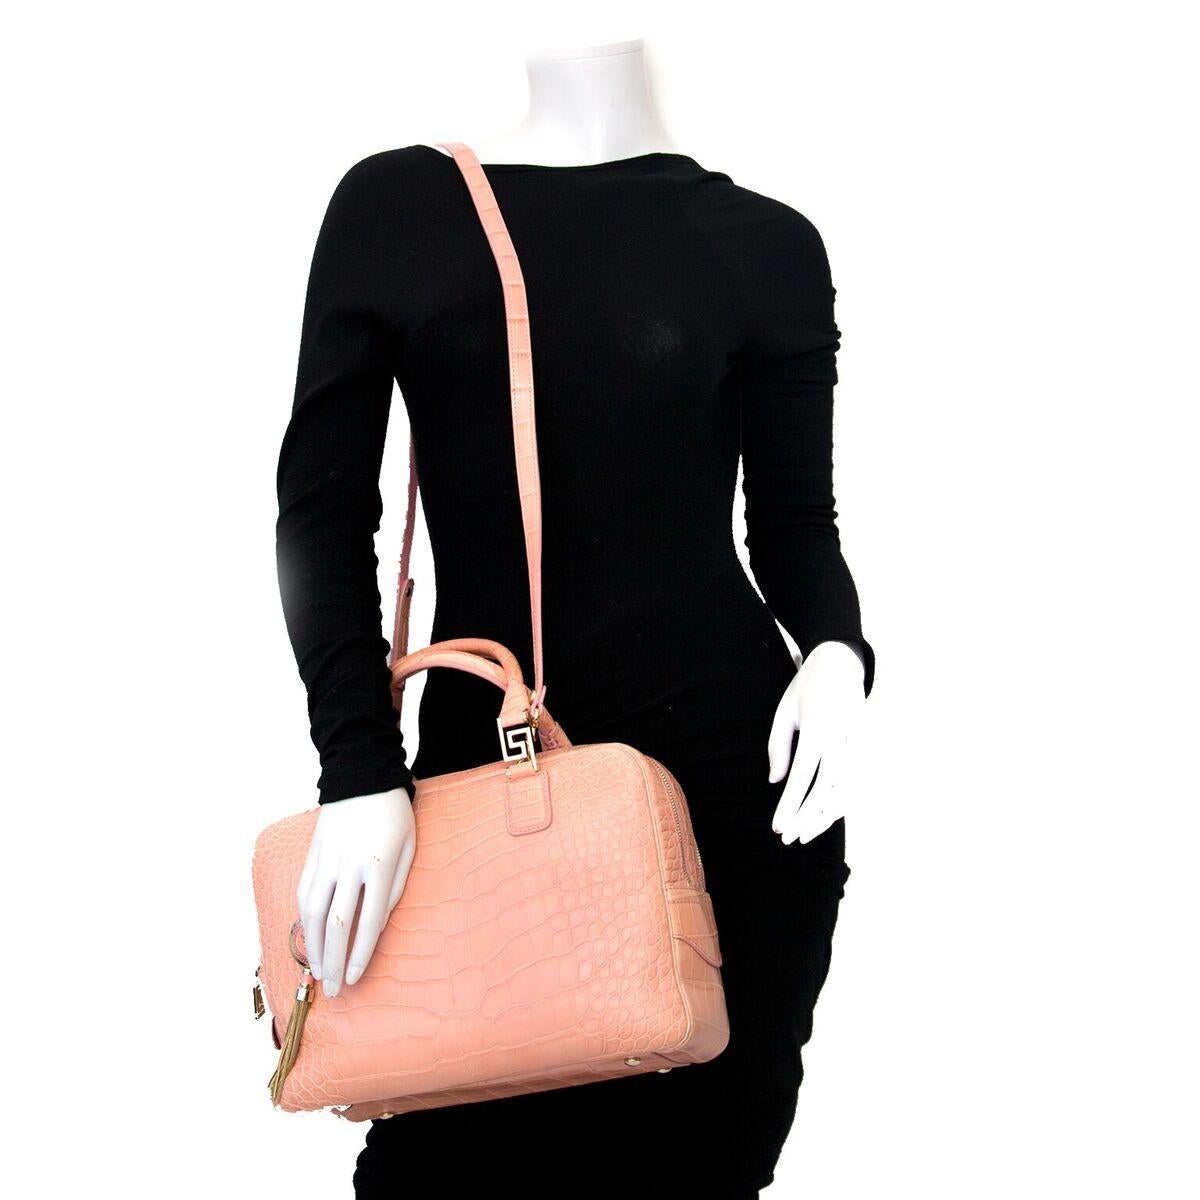 Excellent condition

Versace Soft Pink Croco Bag

EST RET PRICE : € 15000


Versace stands for Italian luxury and that's exactly what you'll find in this bag.
This Versace bag, created out of smooth crocro leather, is definately a must have in your